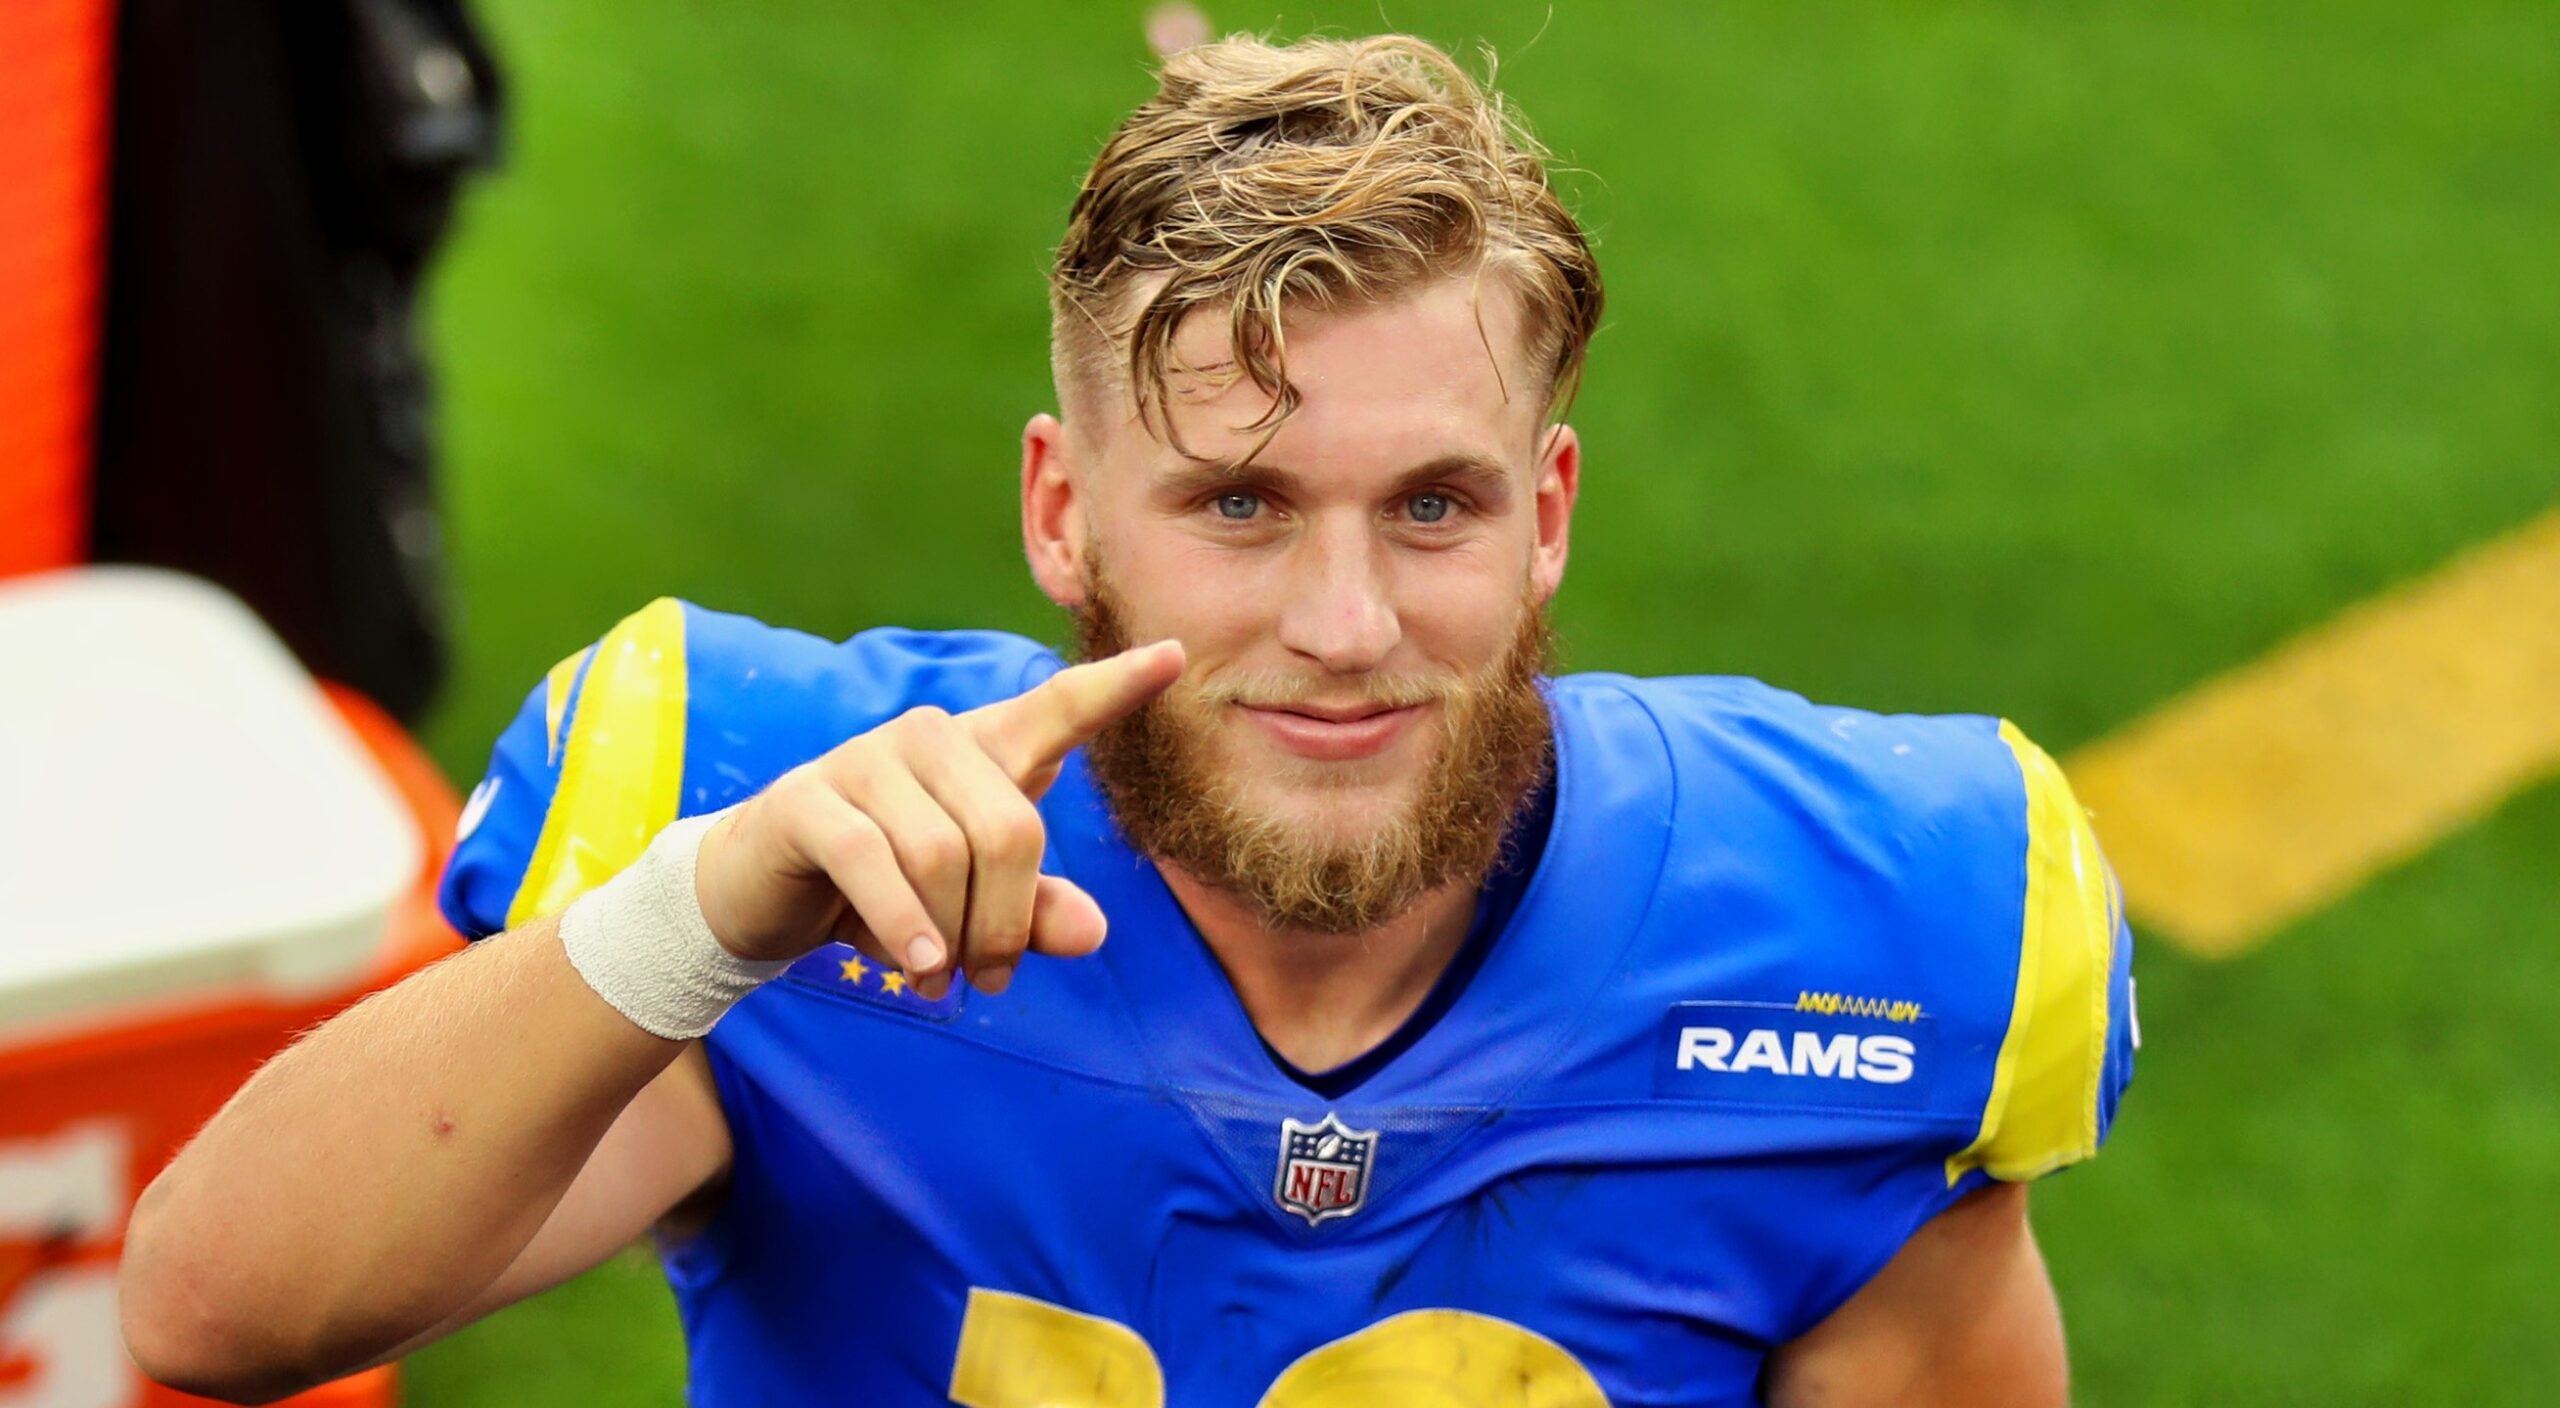 Cooper Kupp ruled out vs. Seahawks on Sunday, could potentially go on IR